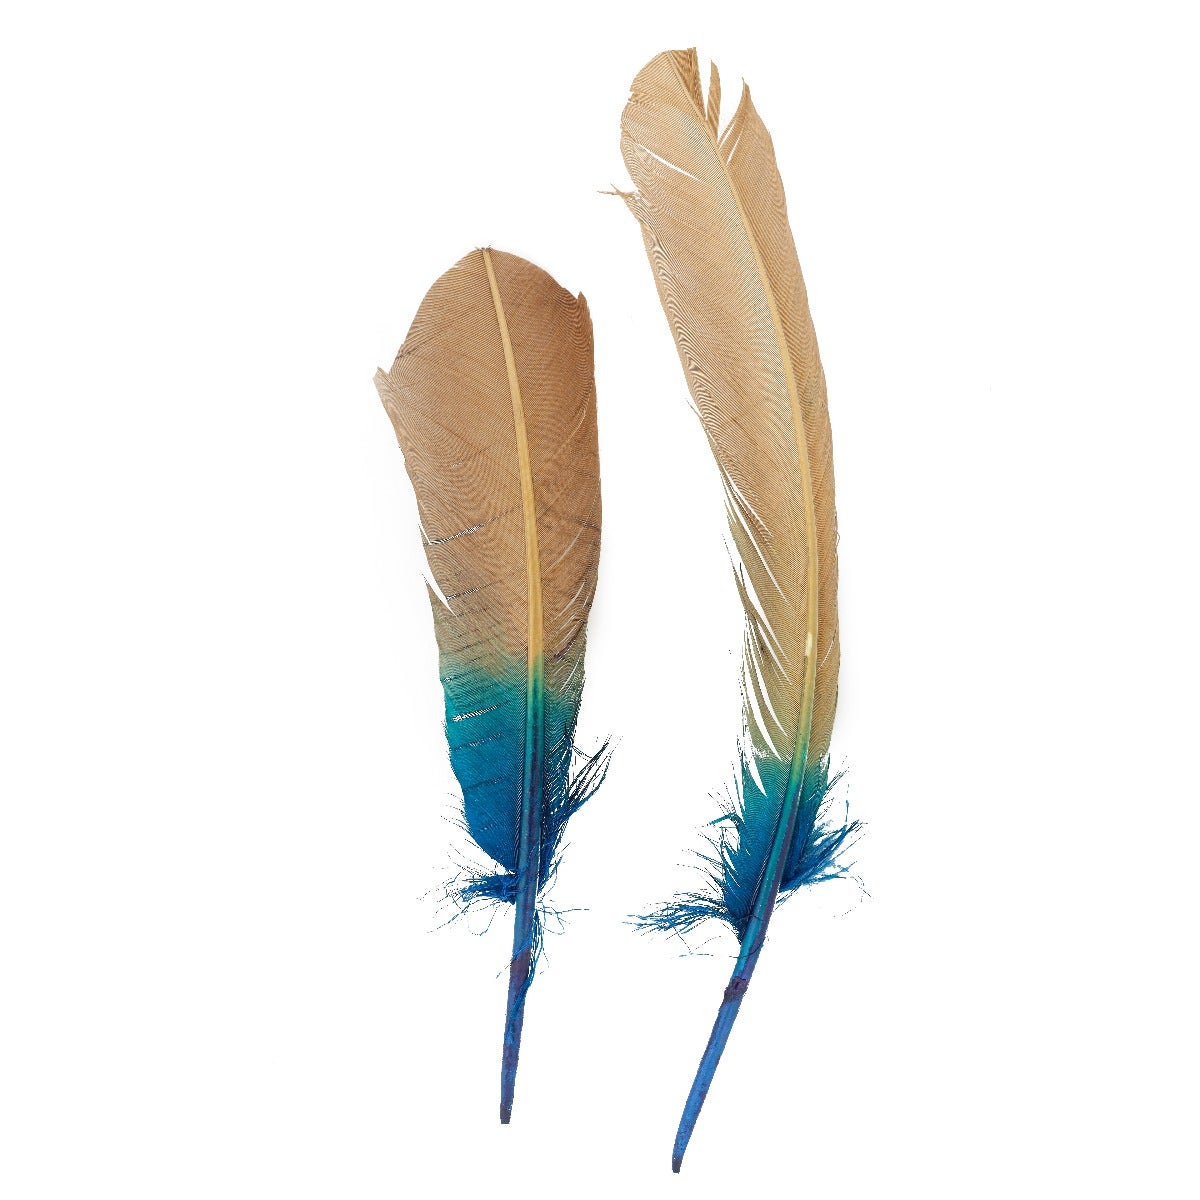 Ombré Turkey Quill Feathers 10-12” 2 pc -  Dark Turquoise - Camel